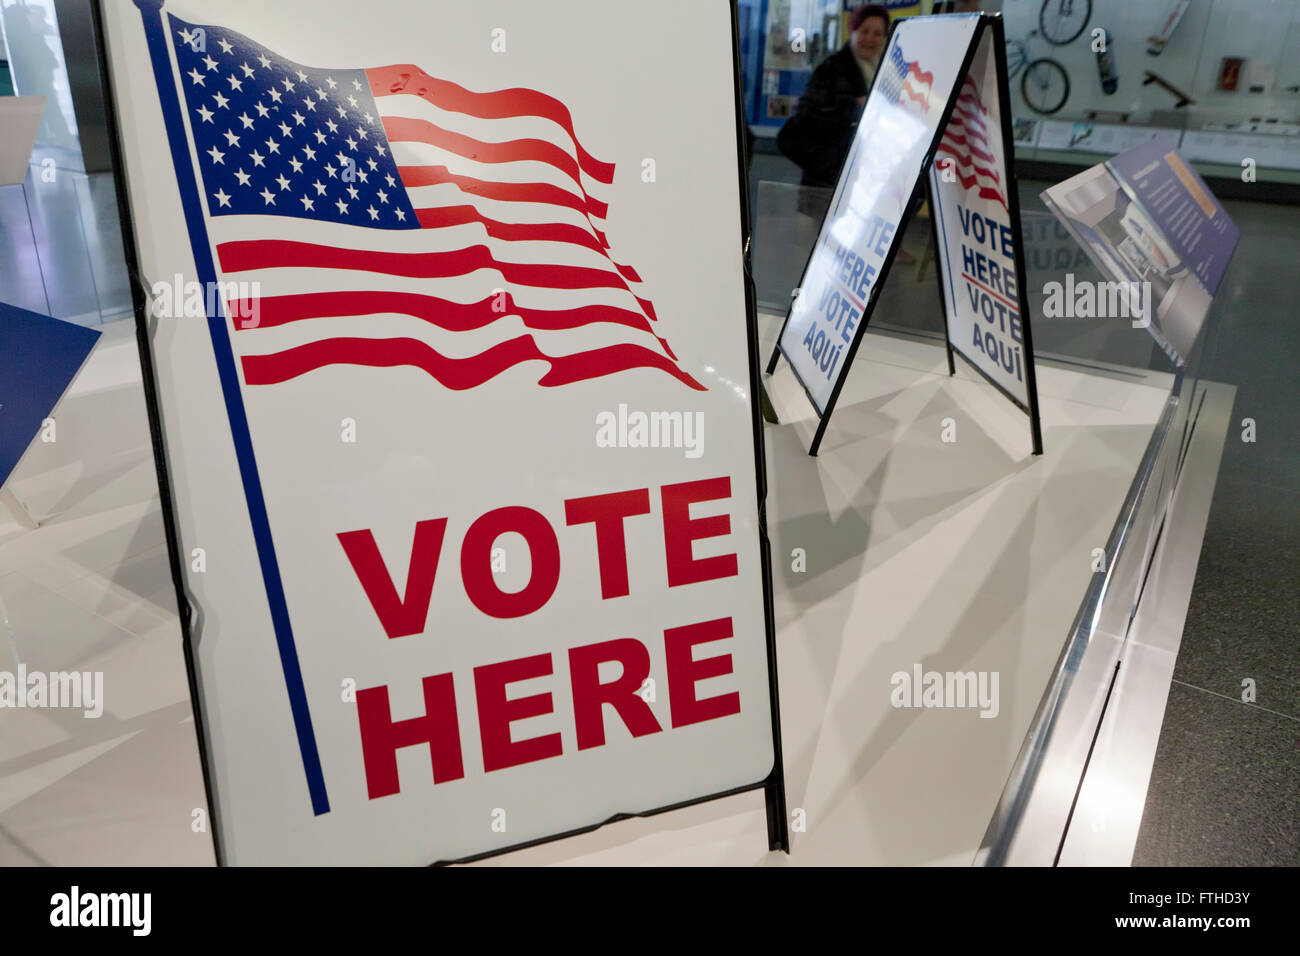 Vote Here sign - USA Stock Photo